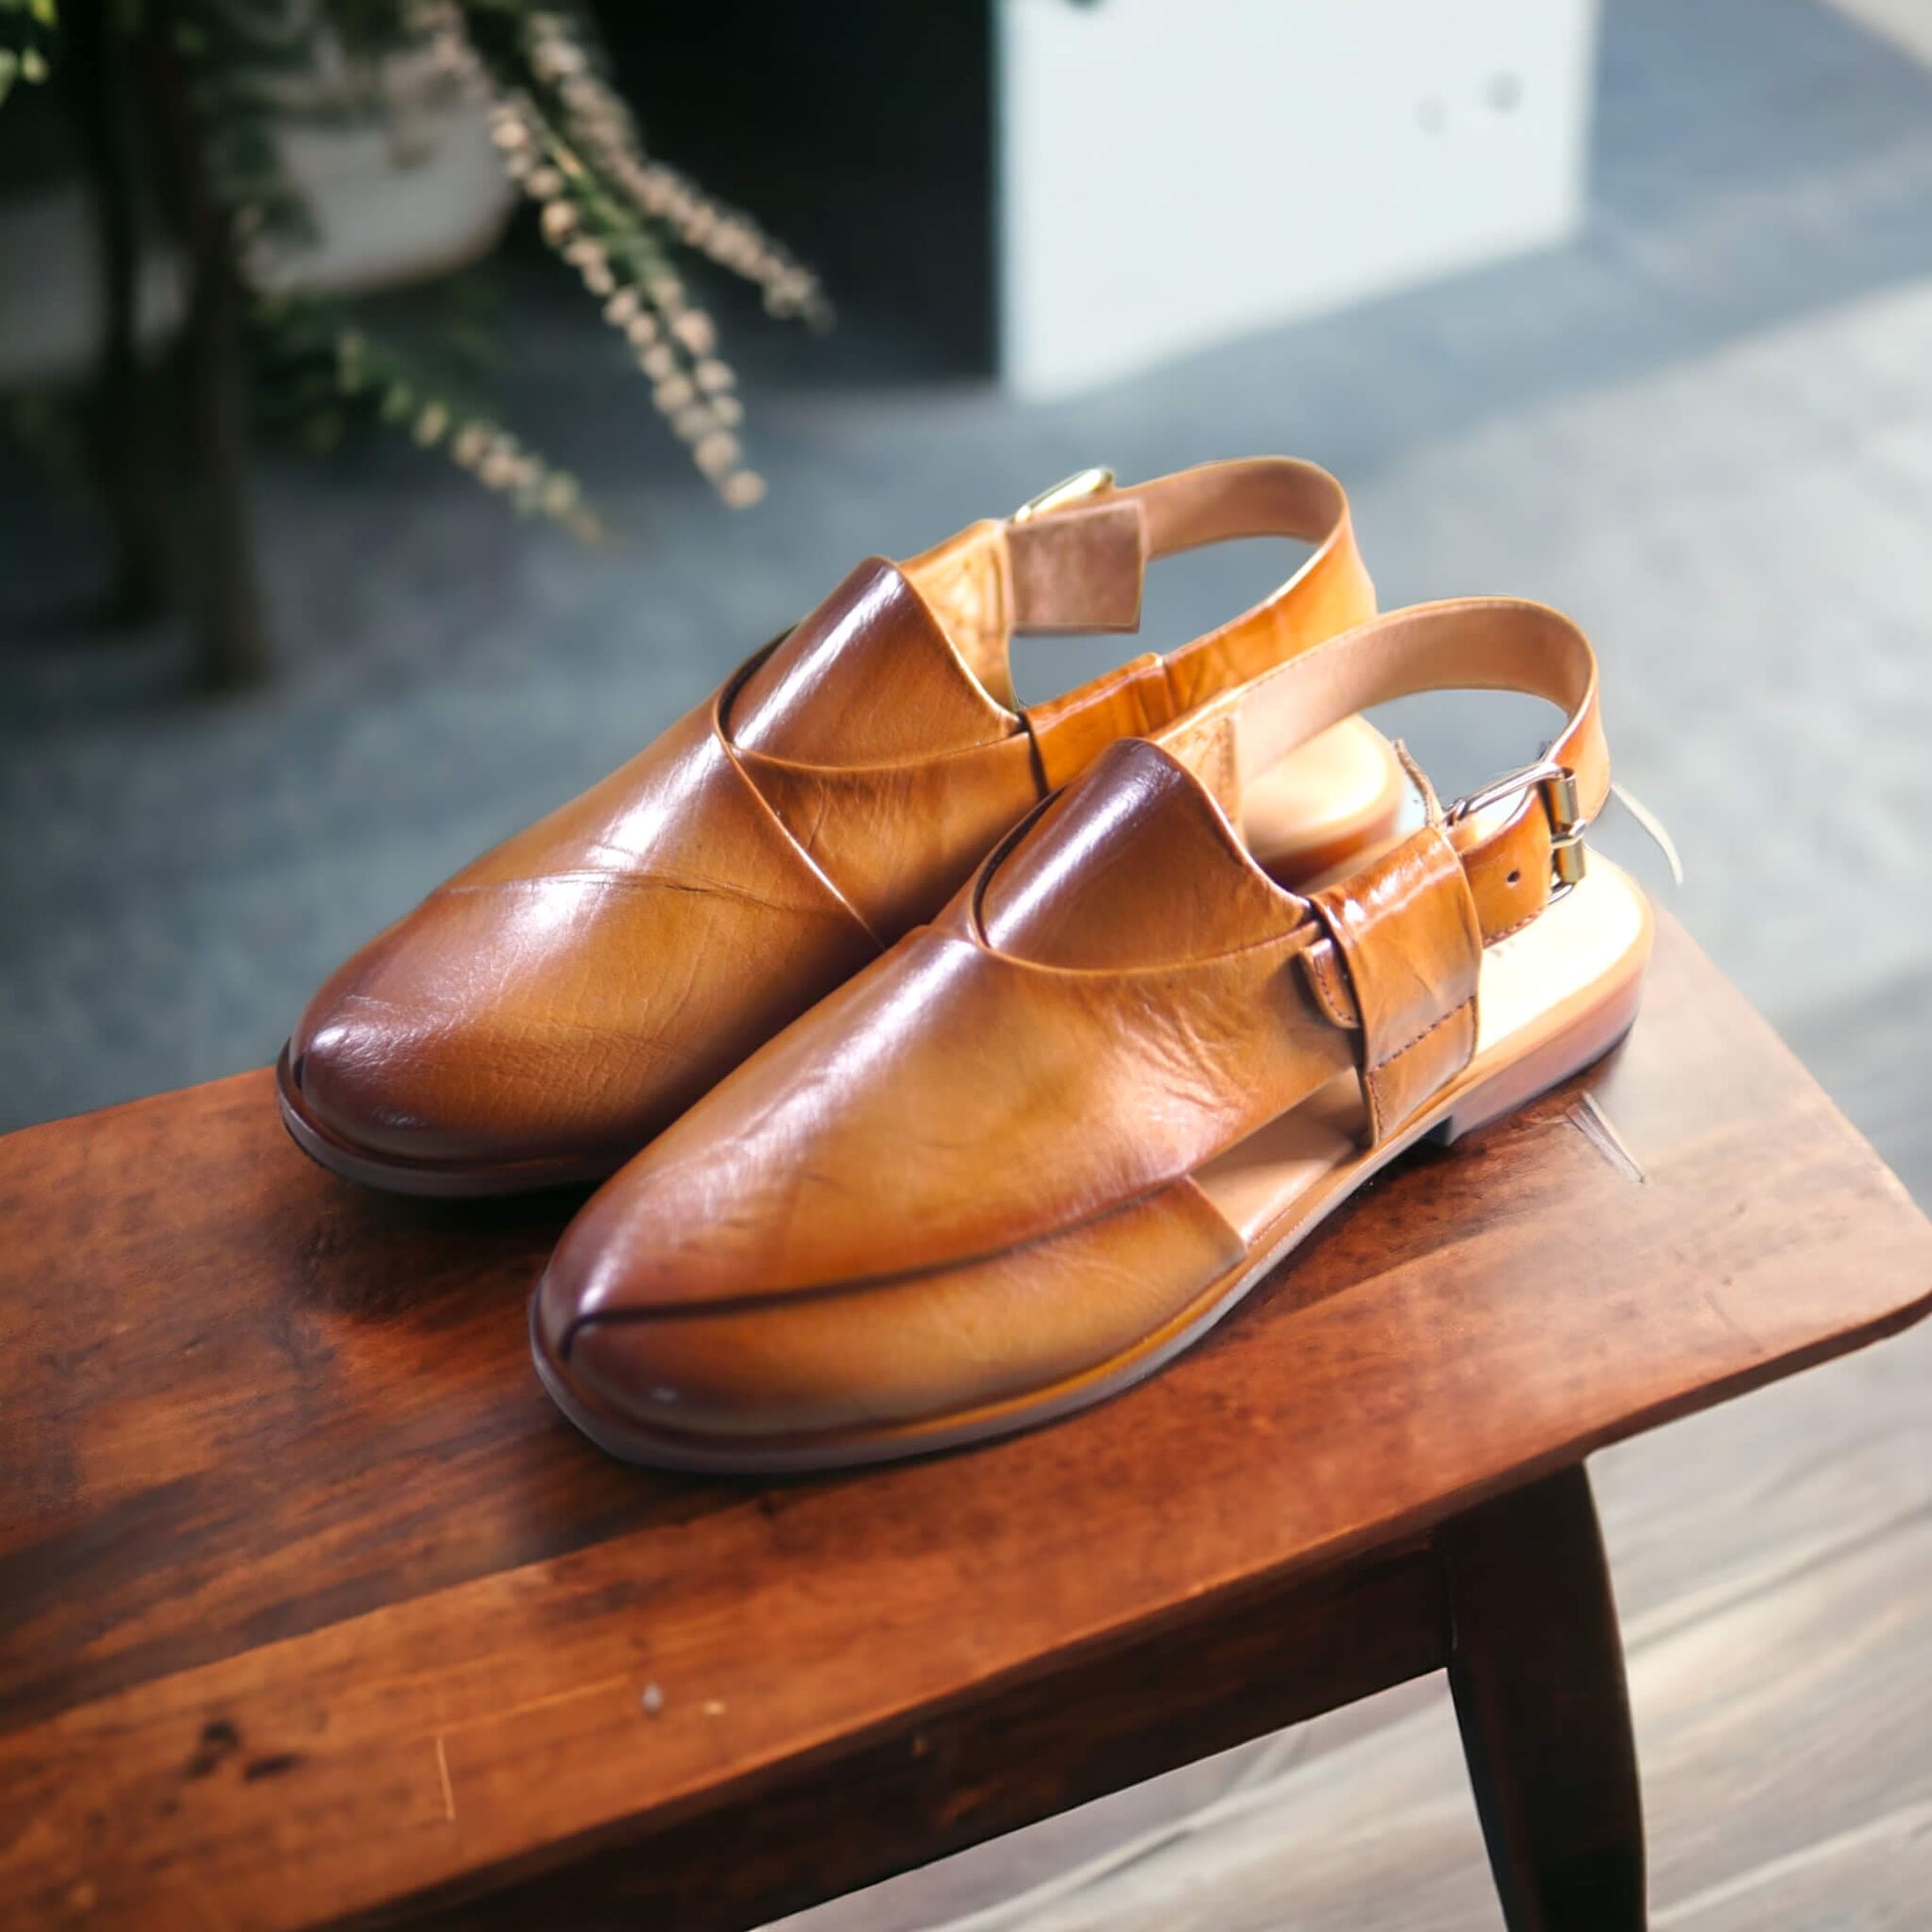 Introducing our handmade leather chappals, meticulously crafted for those who appreciate quality and style. Each pair is skillfully crafted by experienced artisans, ensuring durability and a unique touch. Made from genuine leather, these chappals promise both comfort and a timeless aesthetic. Elevate your footwear collection with the authenticity and craftsmanship of our handmade leather chappals.